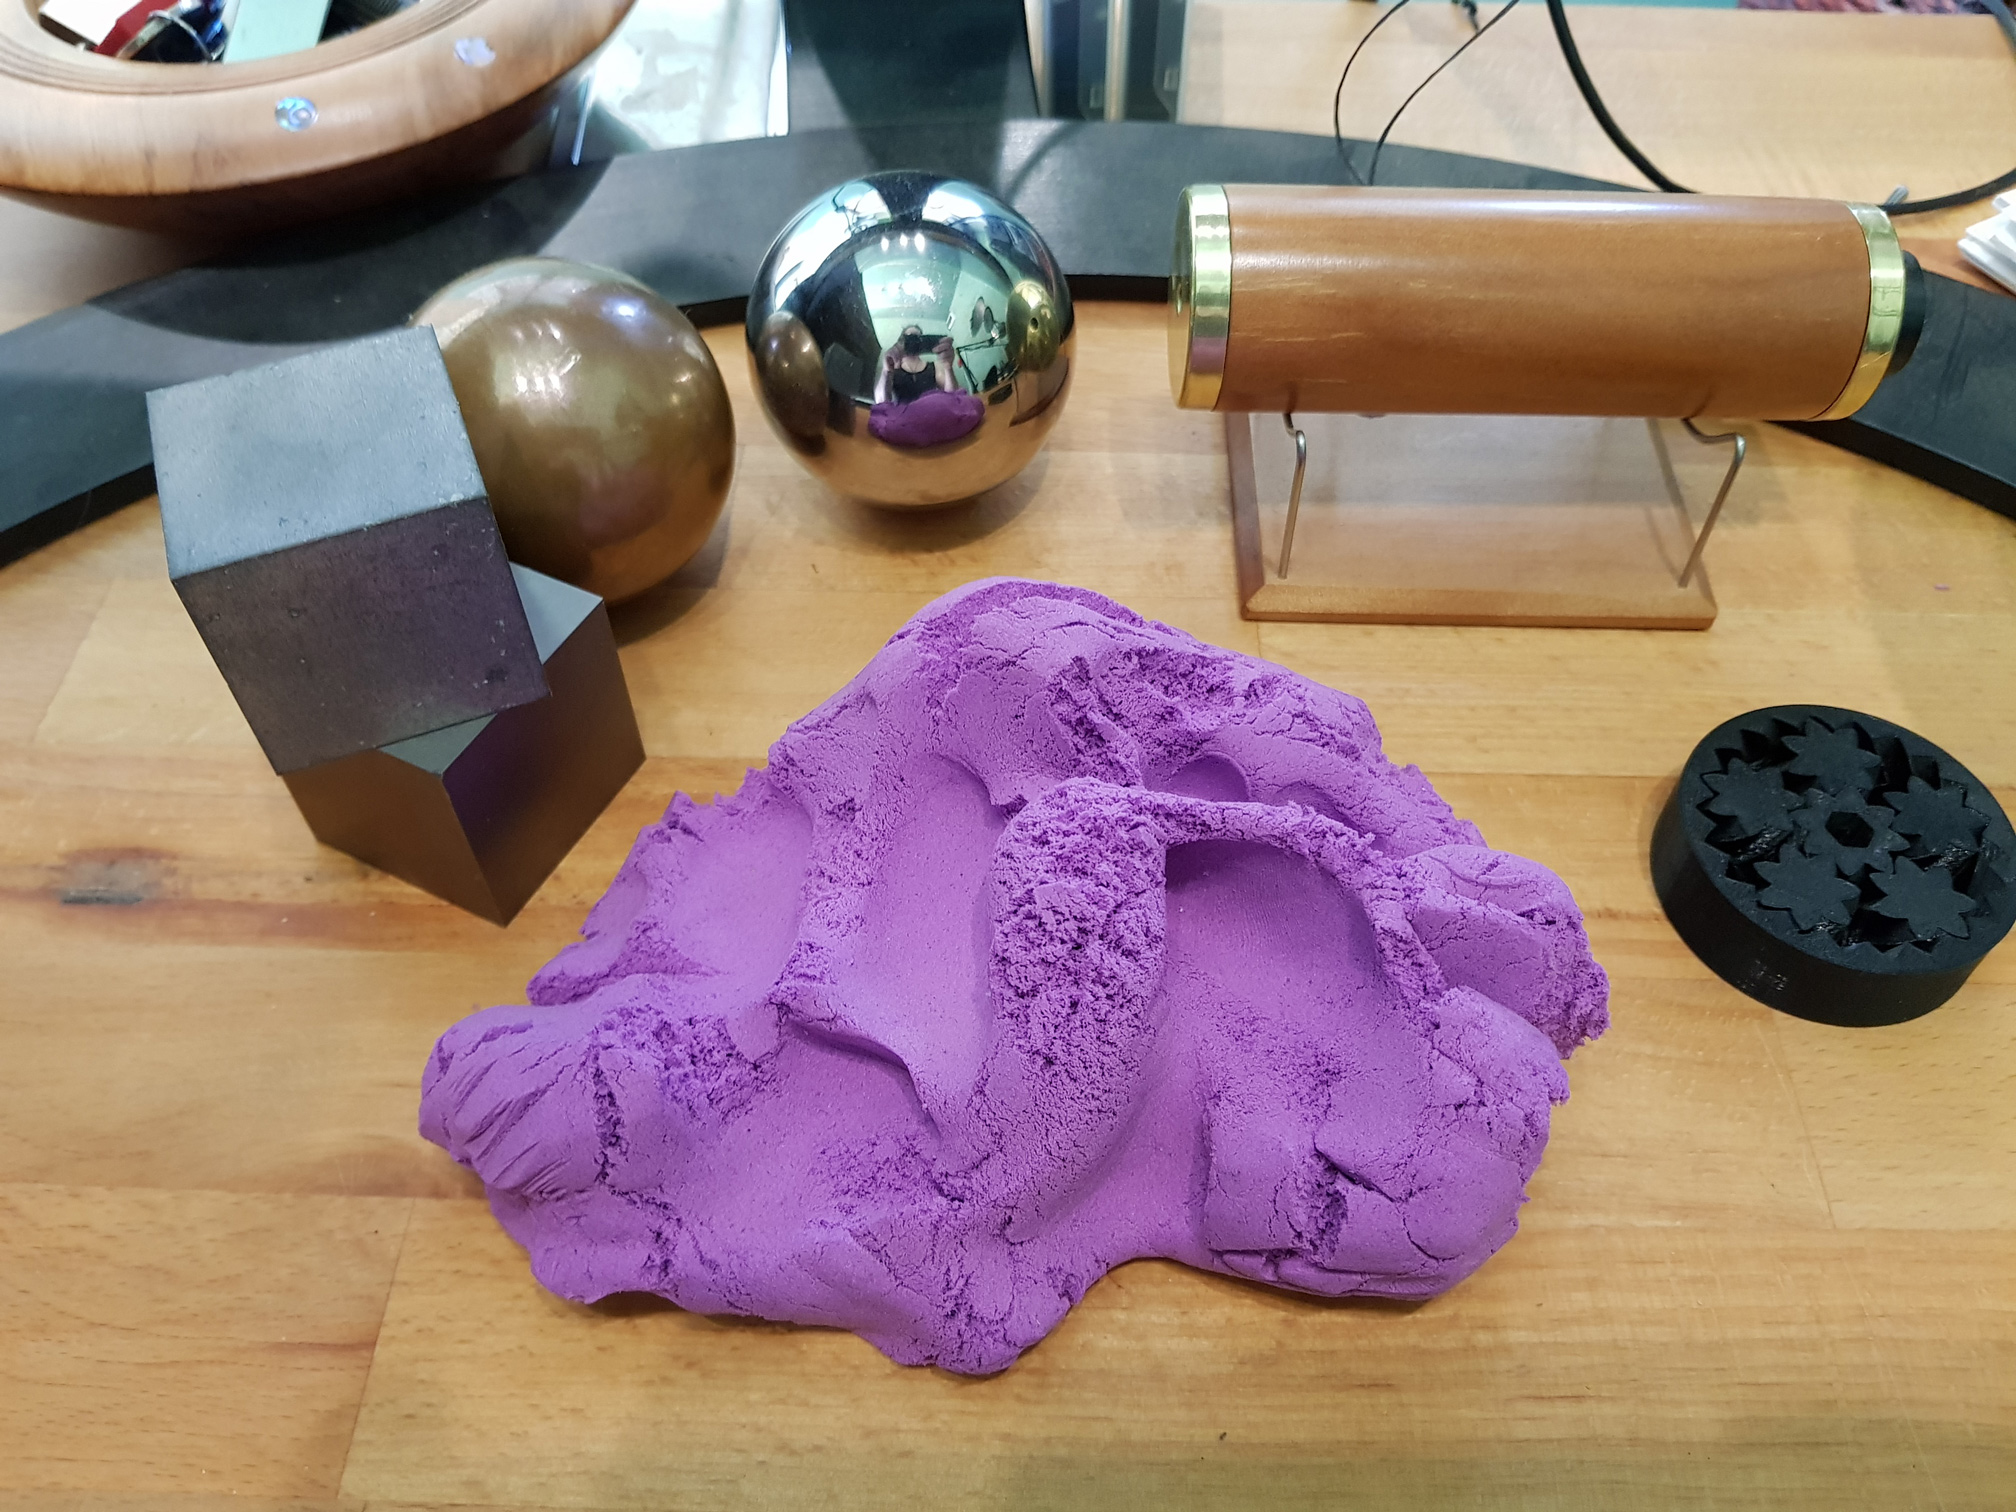 On a desk sits various objects, including putty, blocks and balls, and various other objects to fidget with.